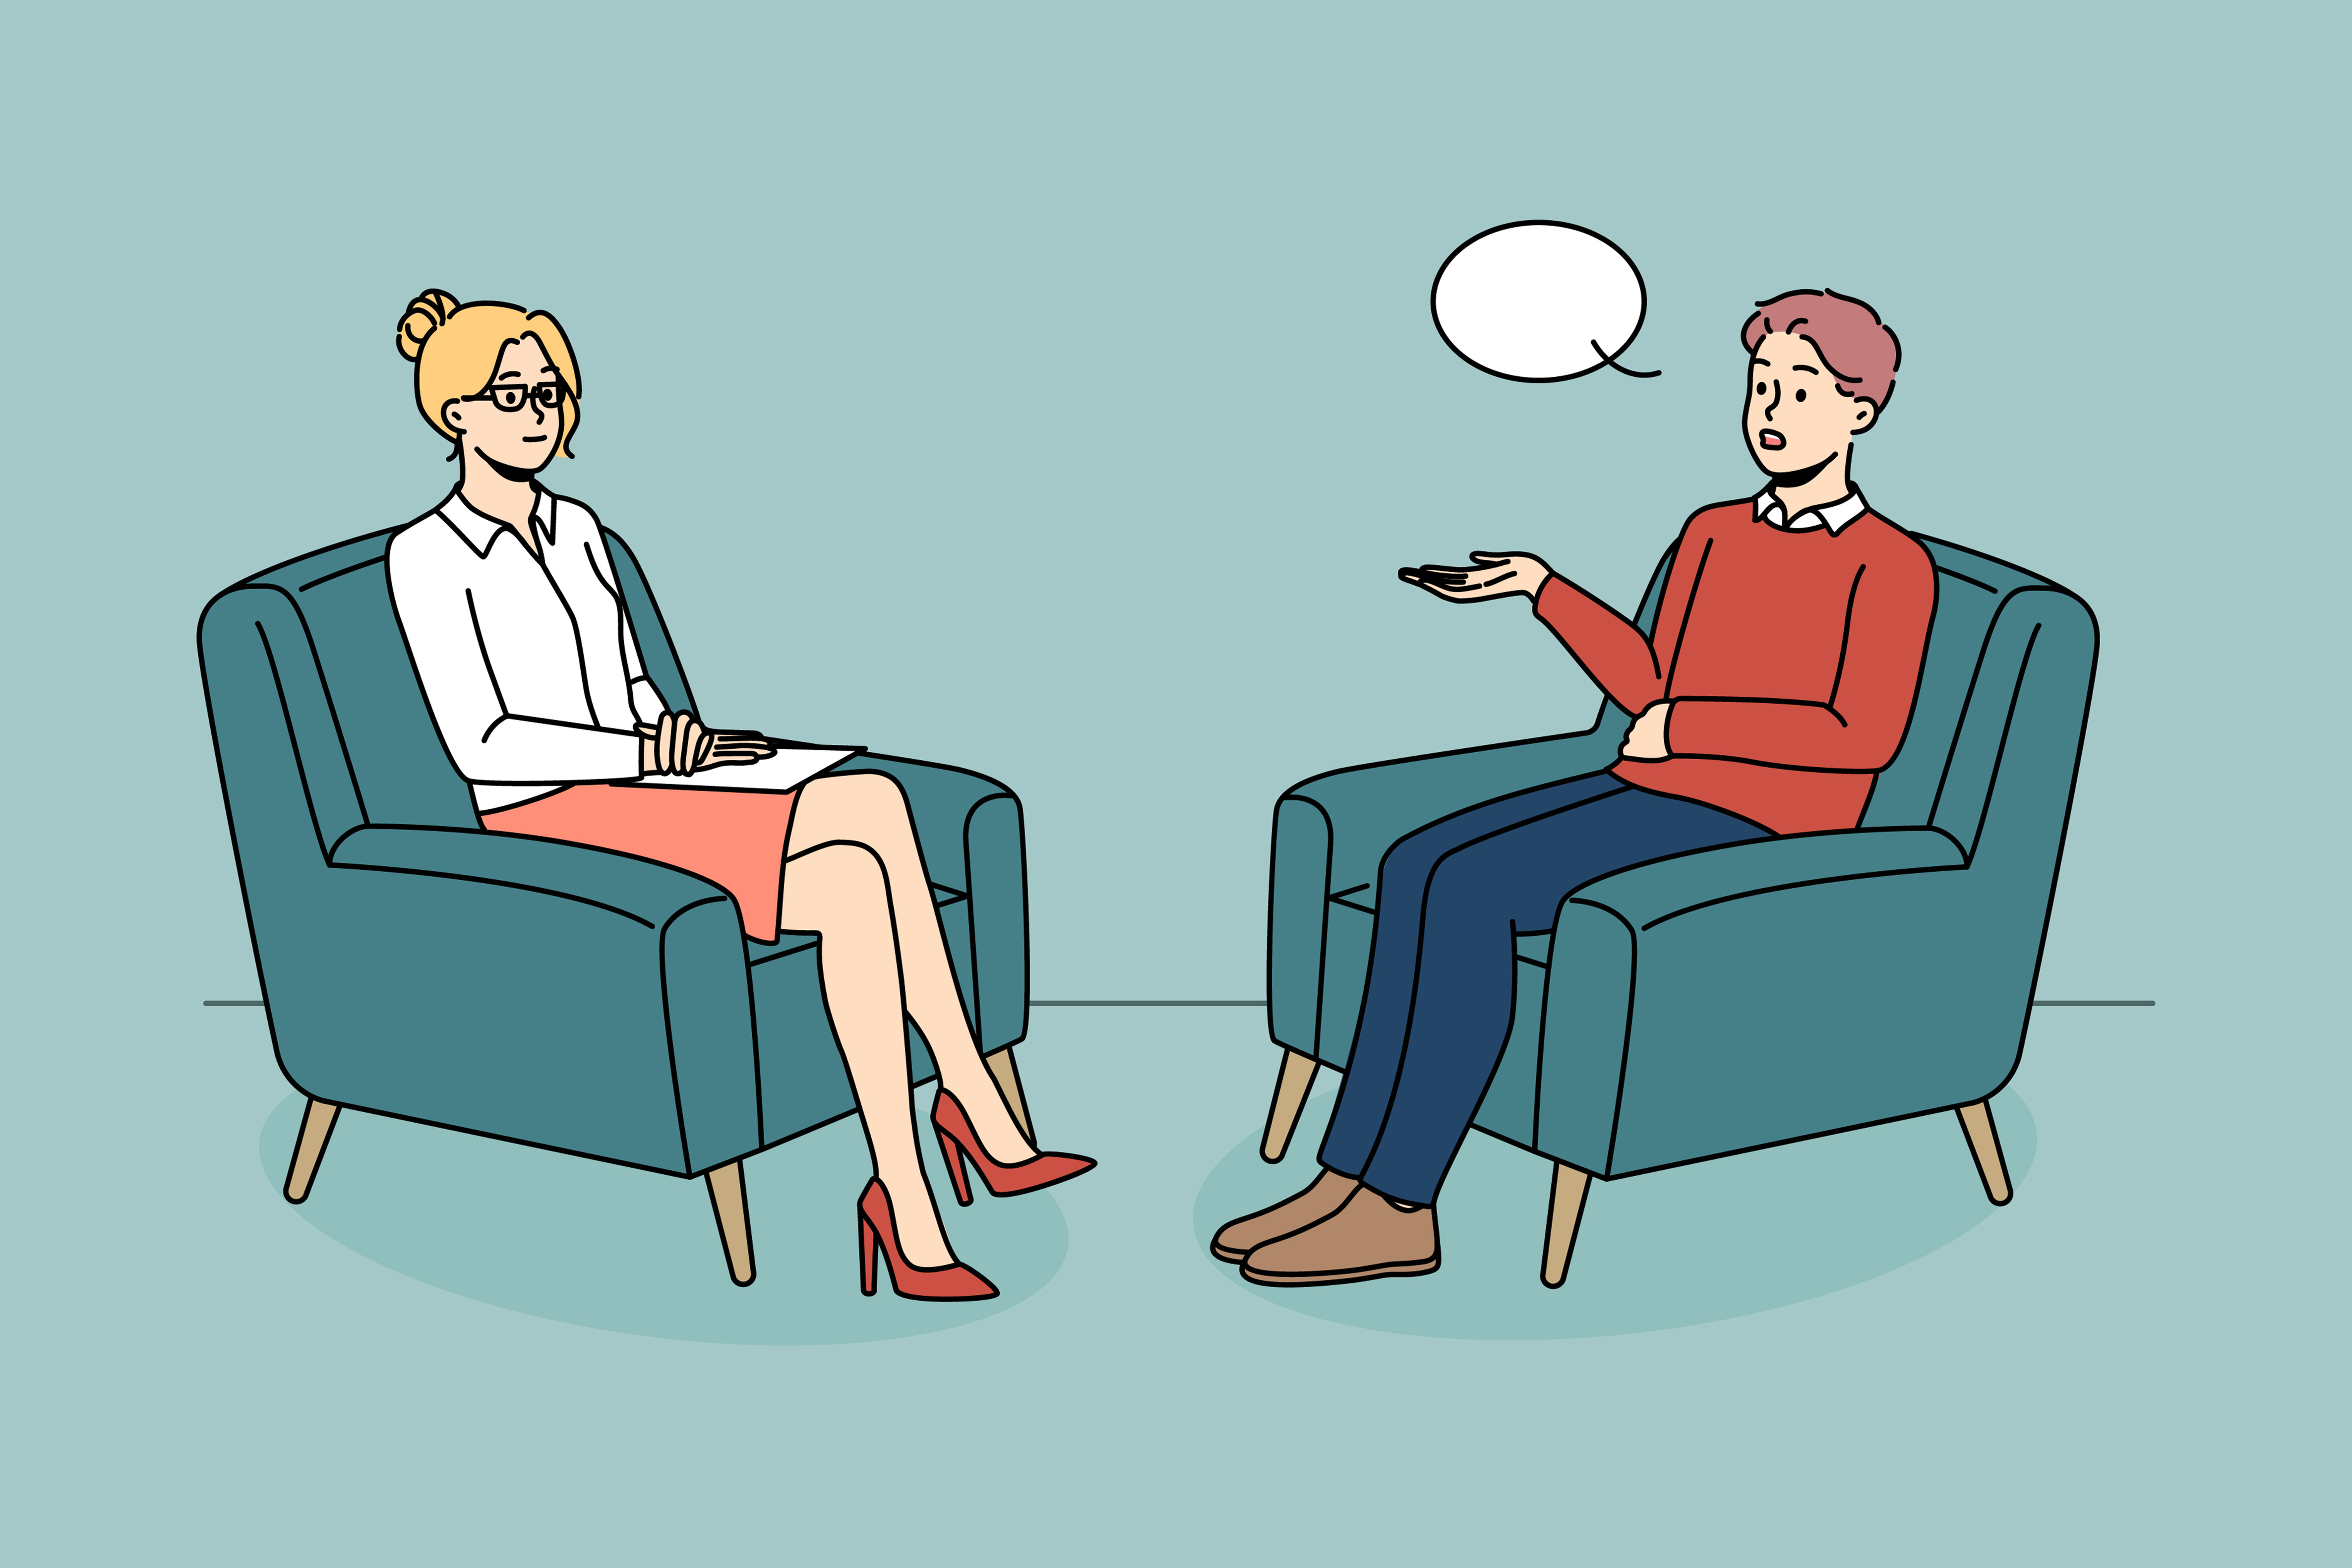 Illustration of patient talking to professional